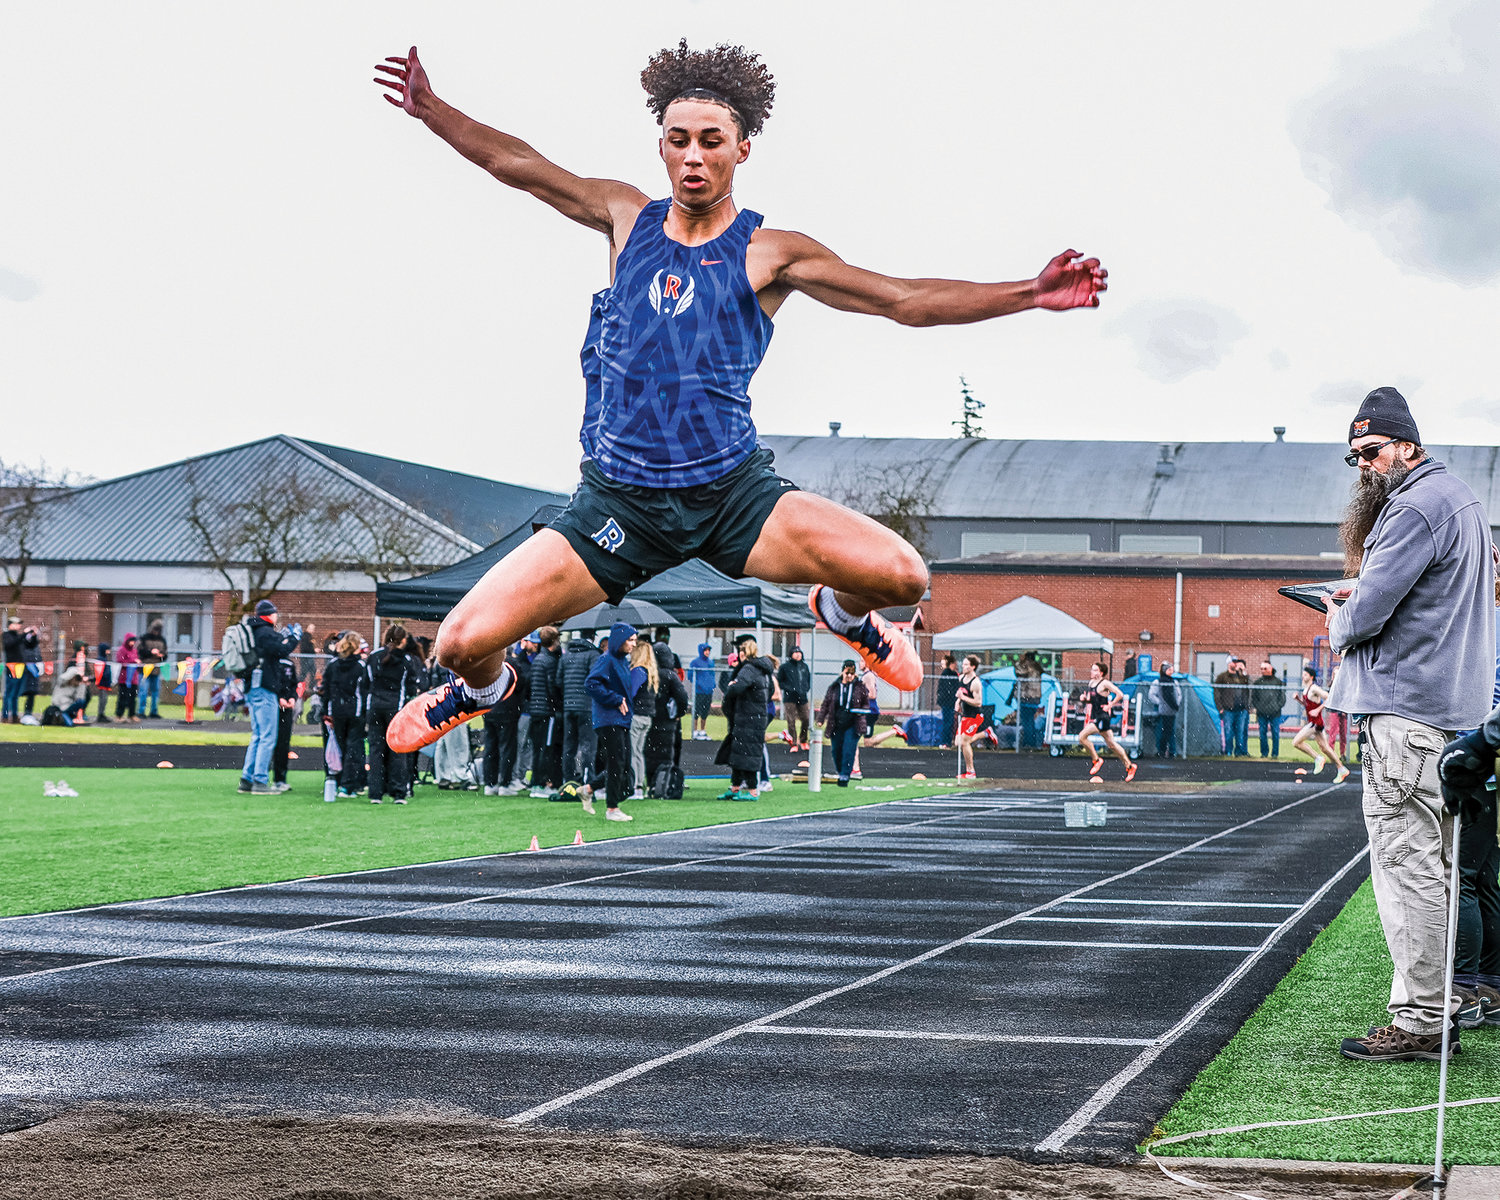 Ridgefield sophomore Landon Kelsey placed fourth in the long jump and third in the triple jump during the Tiger Invite at Battle Ground High School on Saturday, March 25.